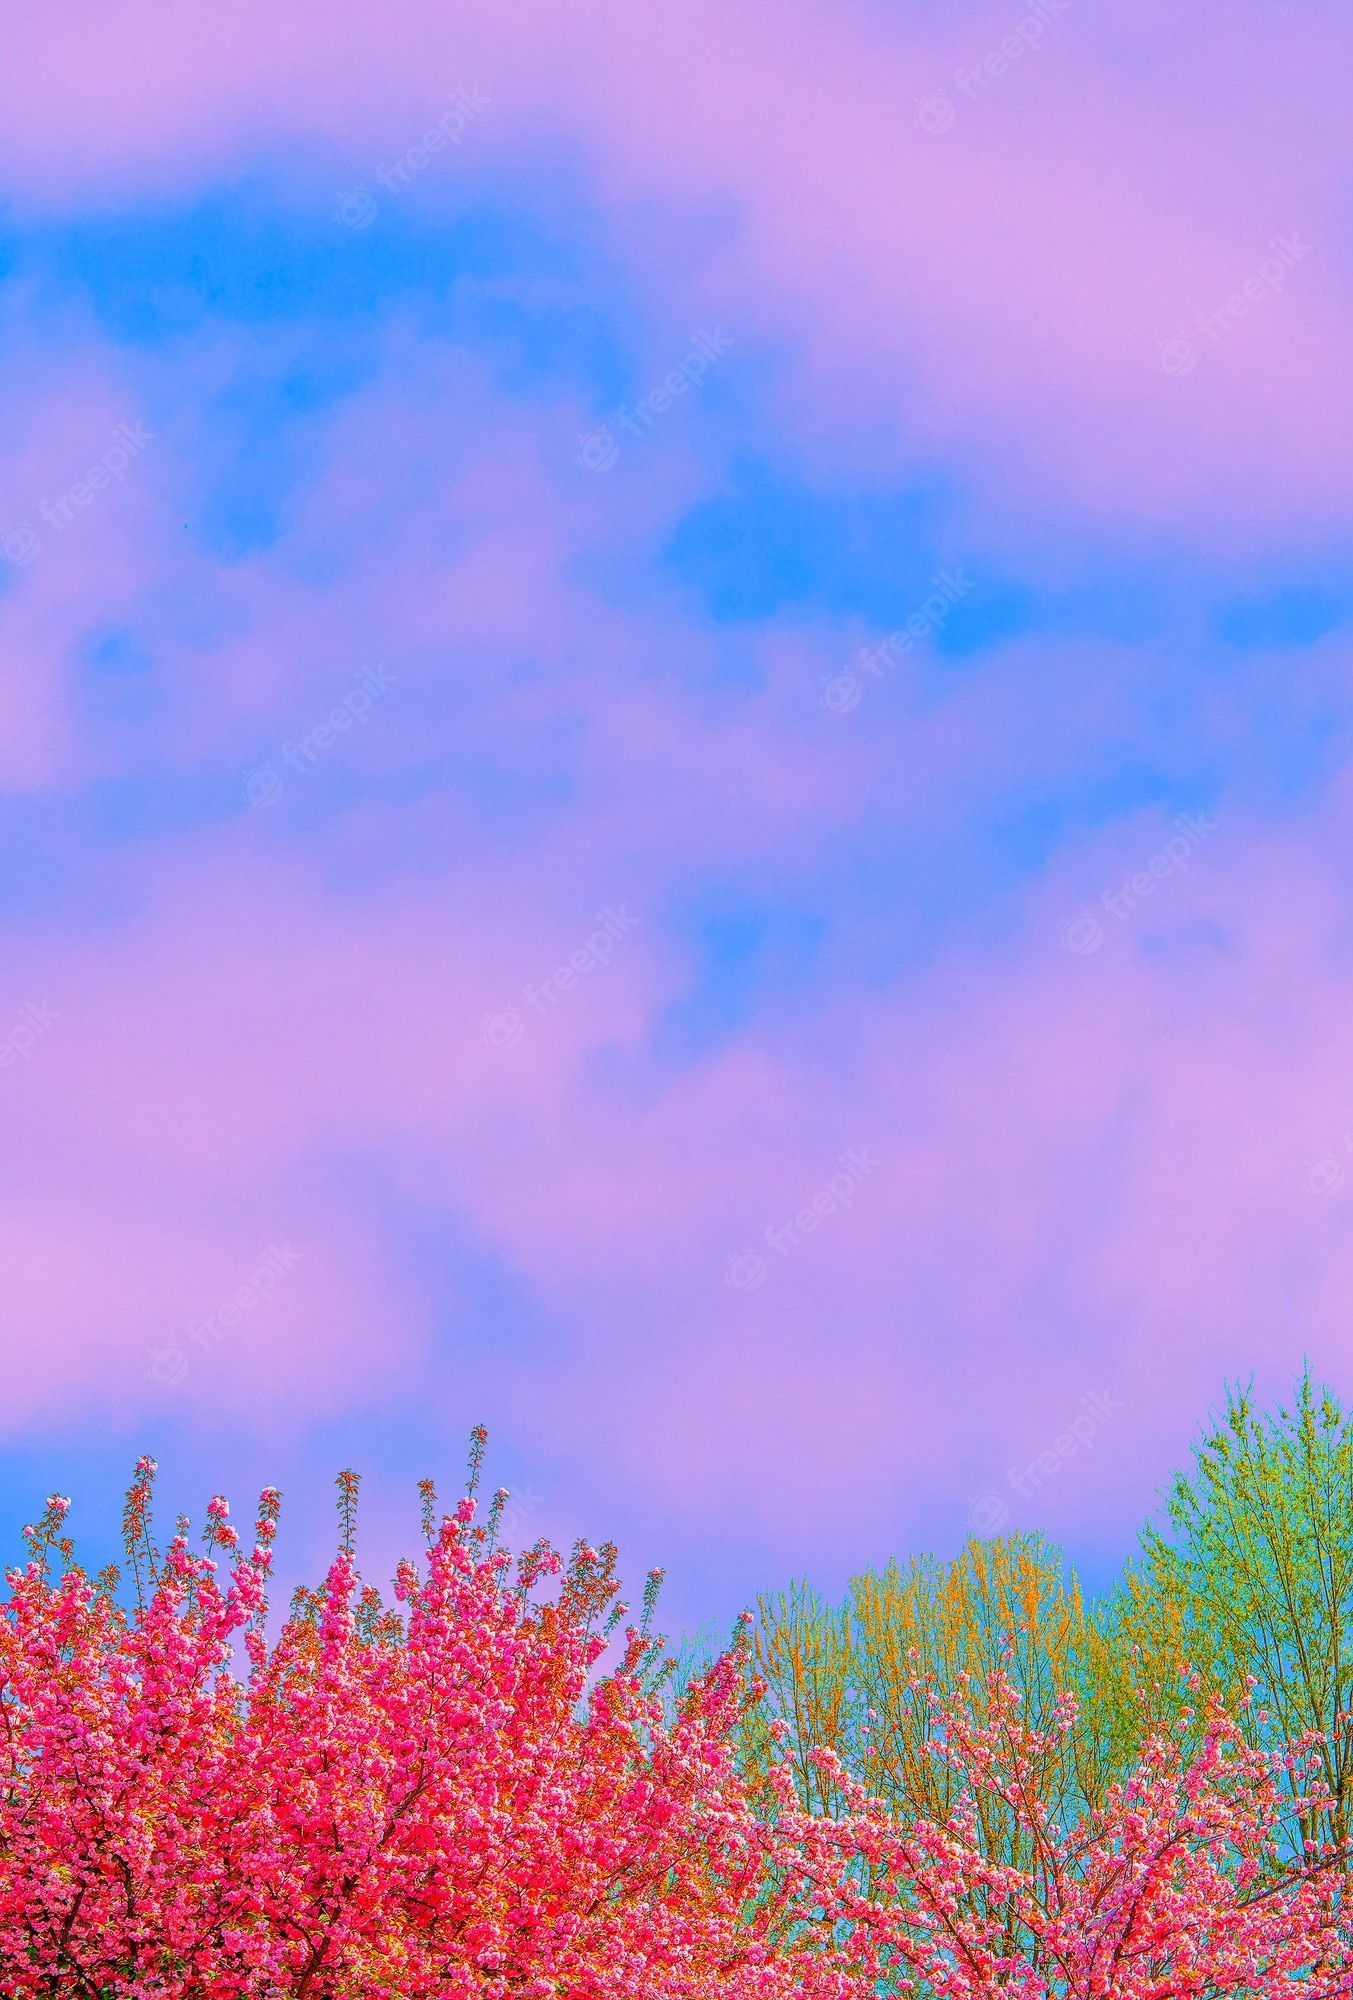 Pink flowers on trees with a blue and pink sky - Spring